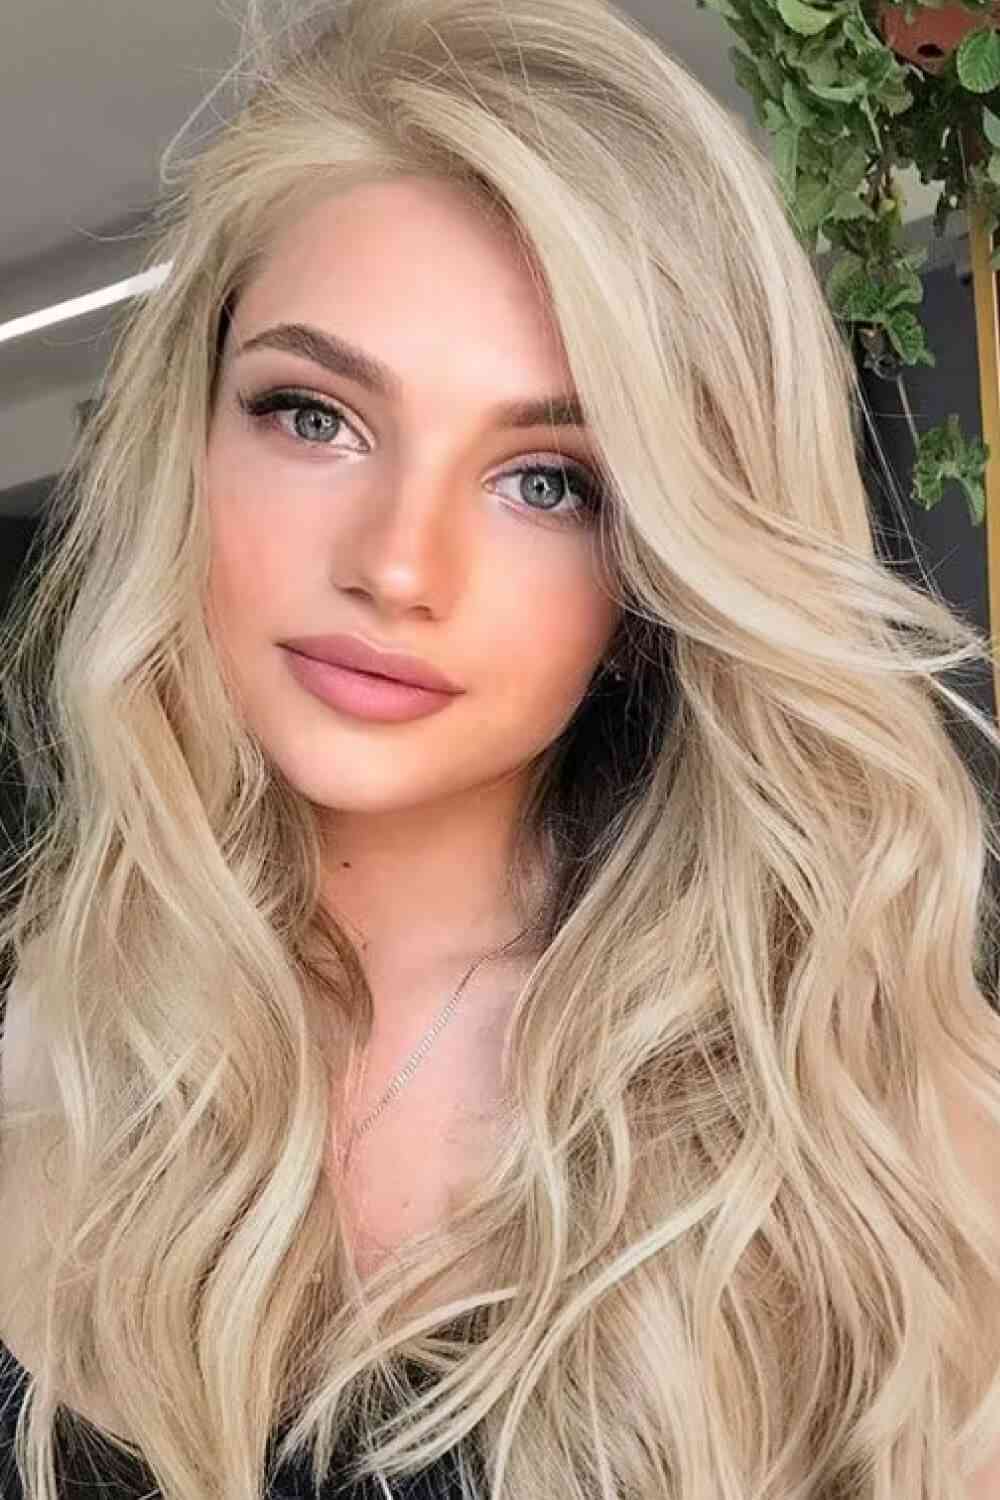 13*2" Lace Front Wigs Synthetic Long Wave 25" 150% Density Blonde One Size 